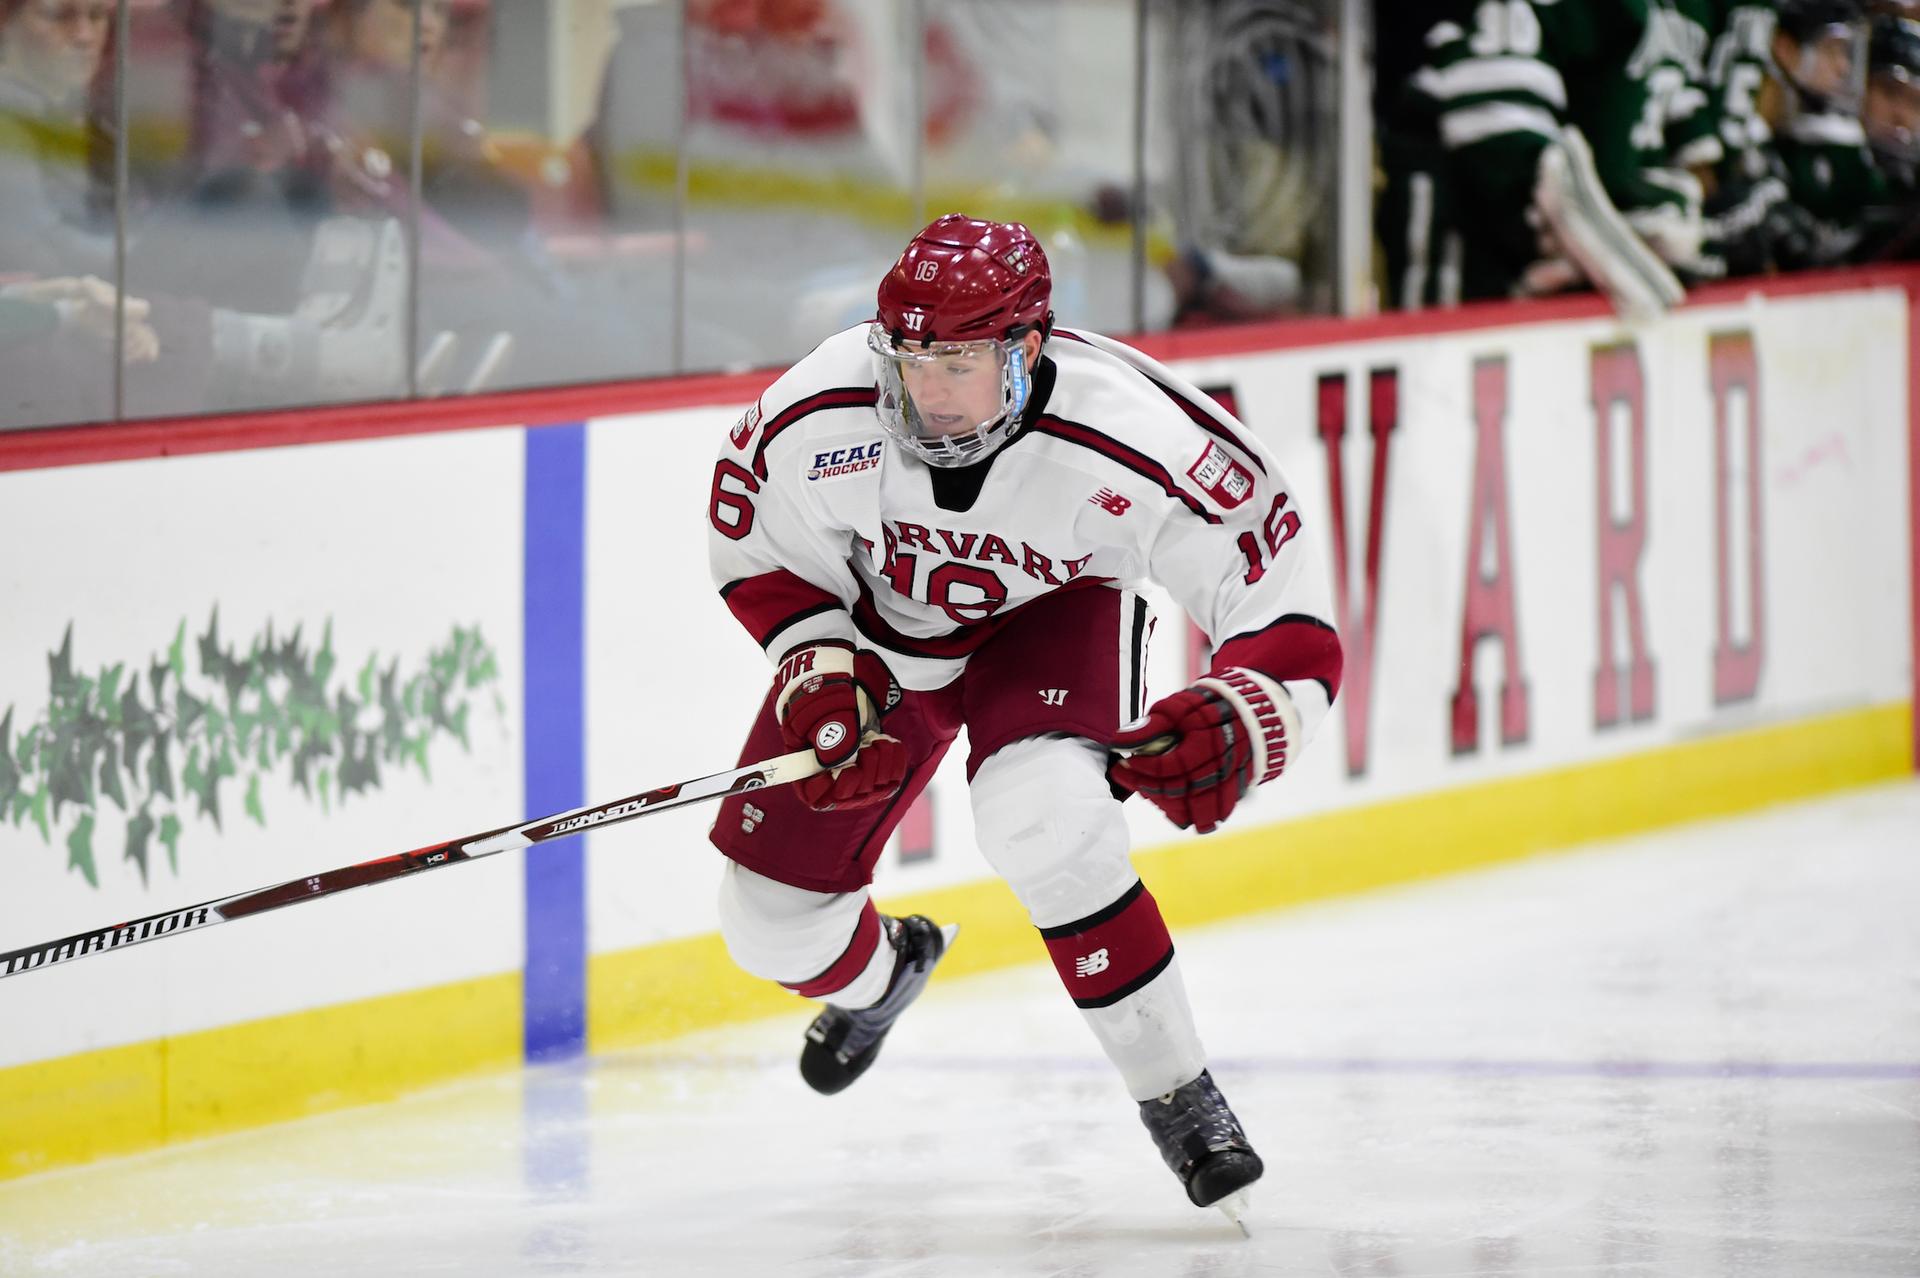 Ryan Donato will be taking a break from Harvard’s team, and classes, to skate for Team USA in South Korea.